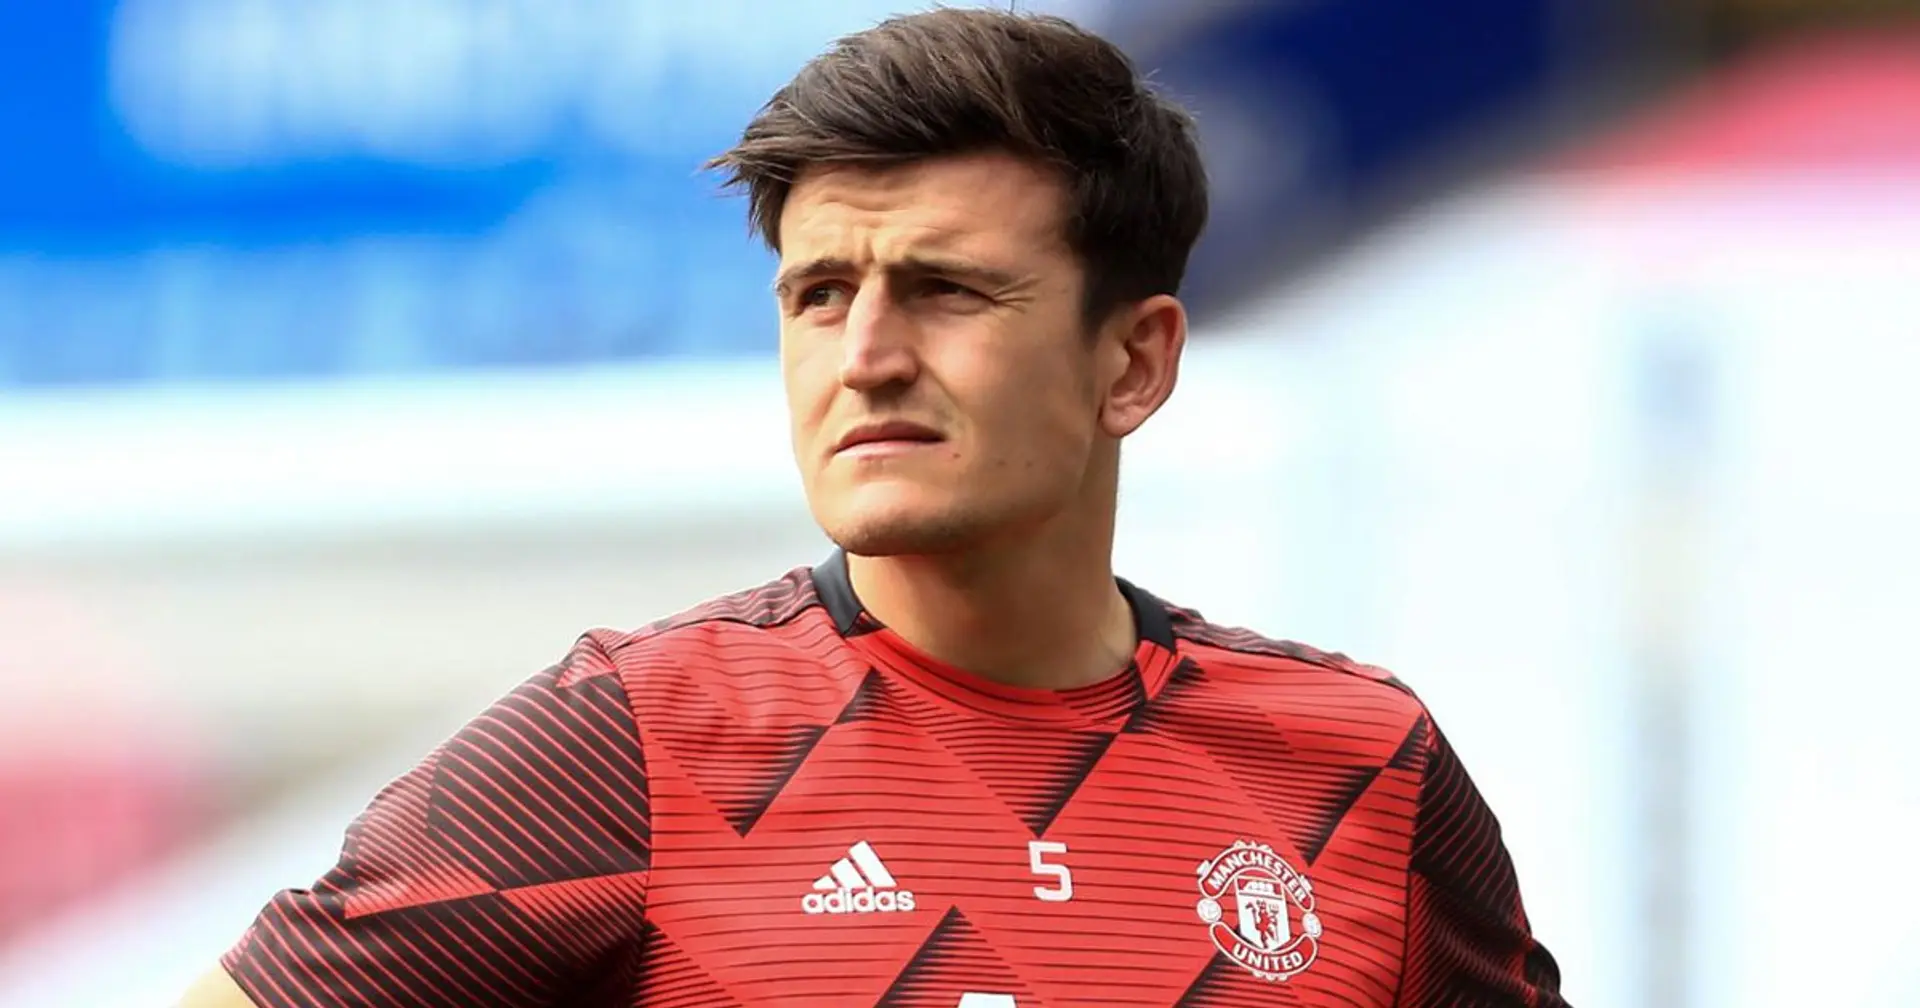 Maguire among few Premier League players with 100% minutes played in 2020/21 season